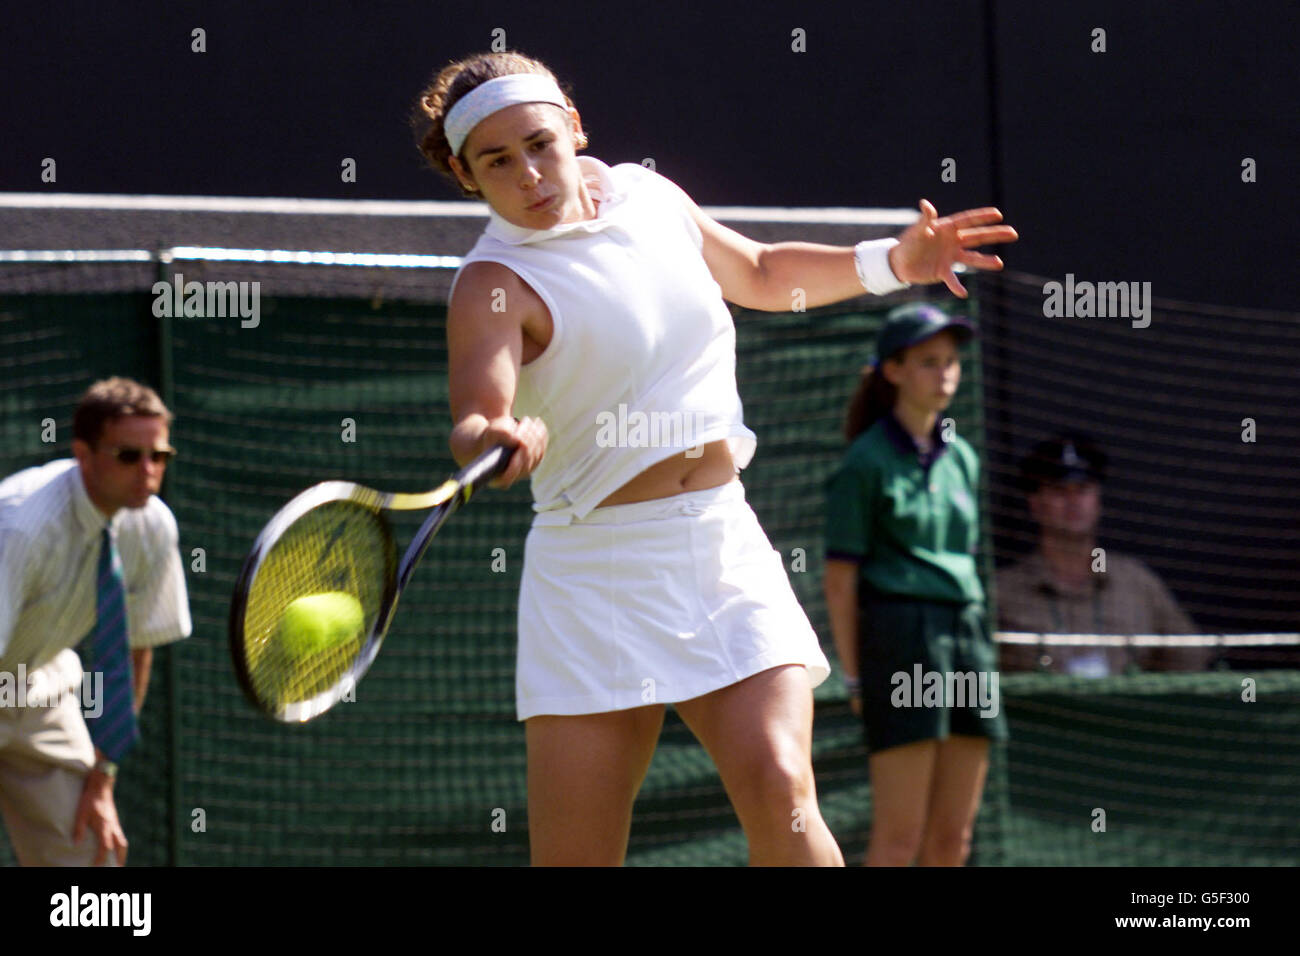 NO COMMERCIAL USE: Spain's Virginia Ruano Pascual returns the shot of Switzerland's Martina Hingis during the First Round match of the Lawn Tennis Championships at Wimbledon, London. Stock Photo